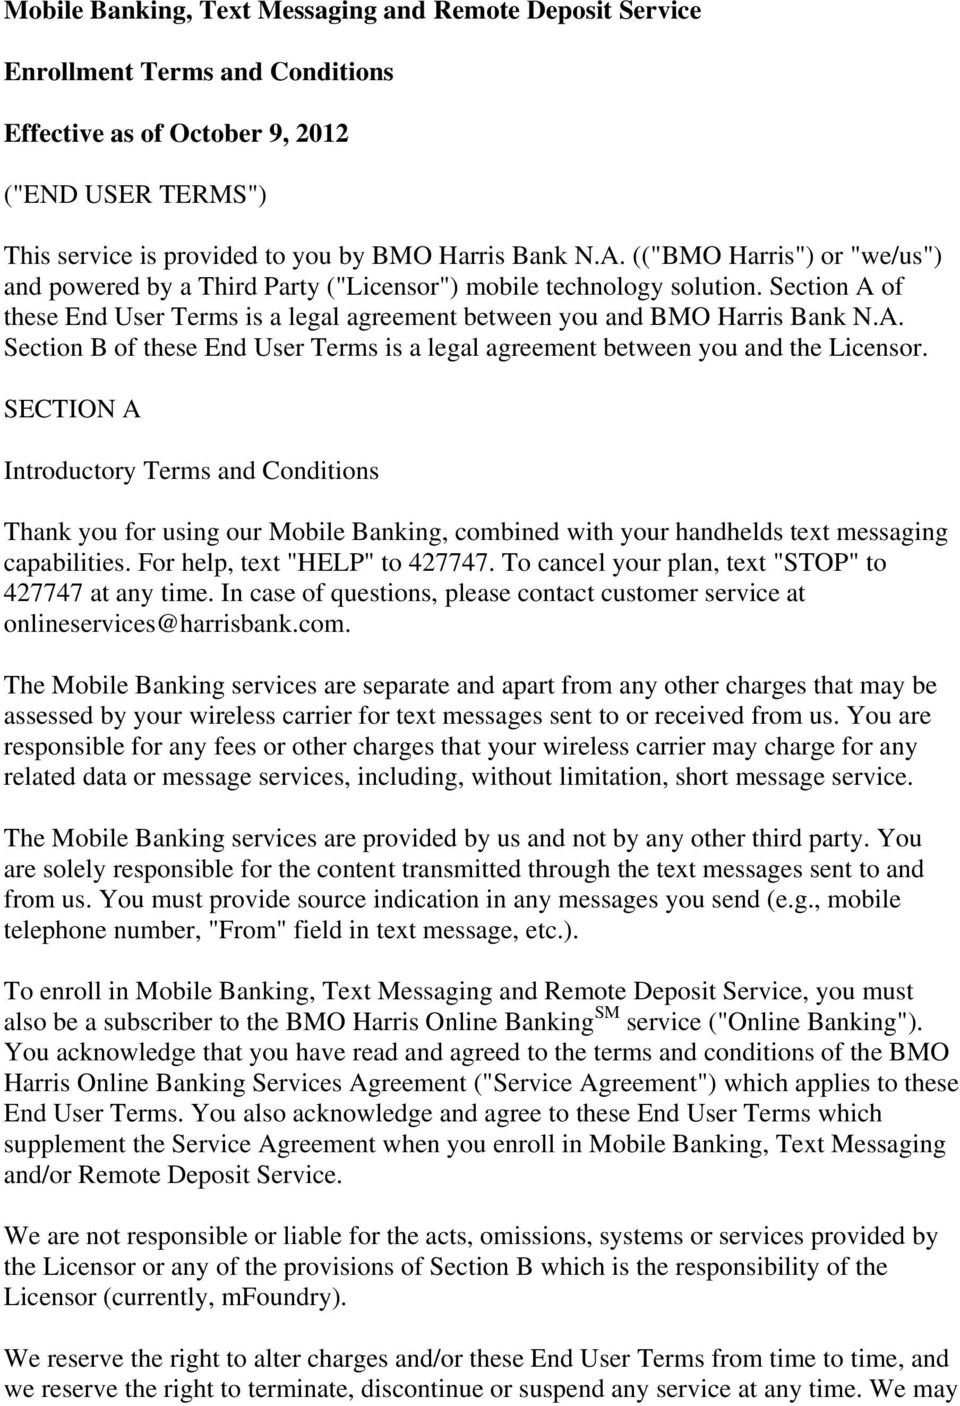 SECTION A Introductory Terms and Conditions Thank you for using our Mobile Banking, combined with your handhelds text messaging capabilities. For help, text "HELP" to 427747.